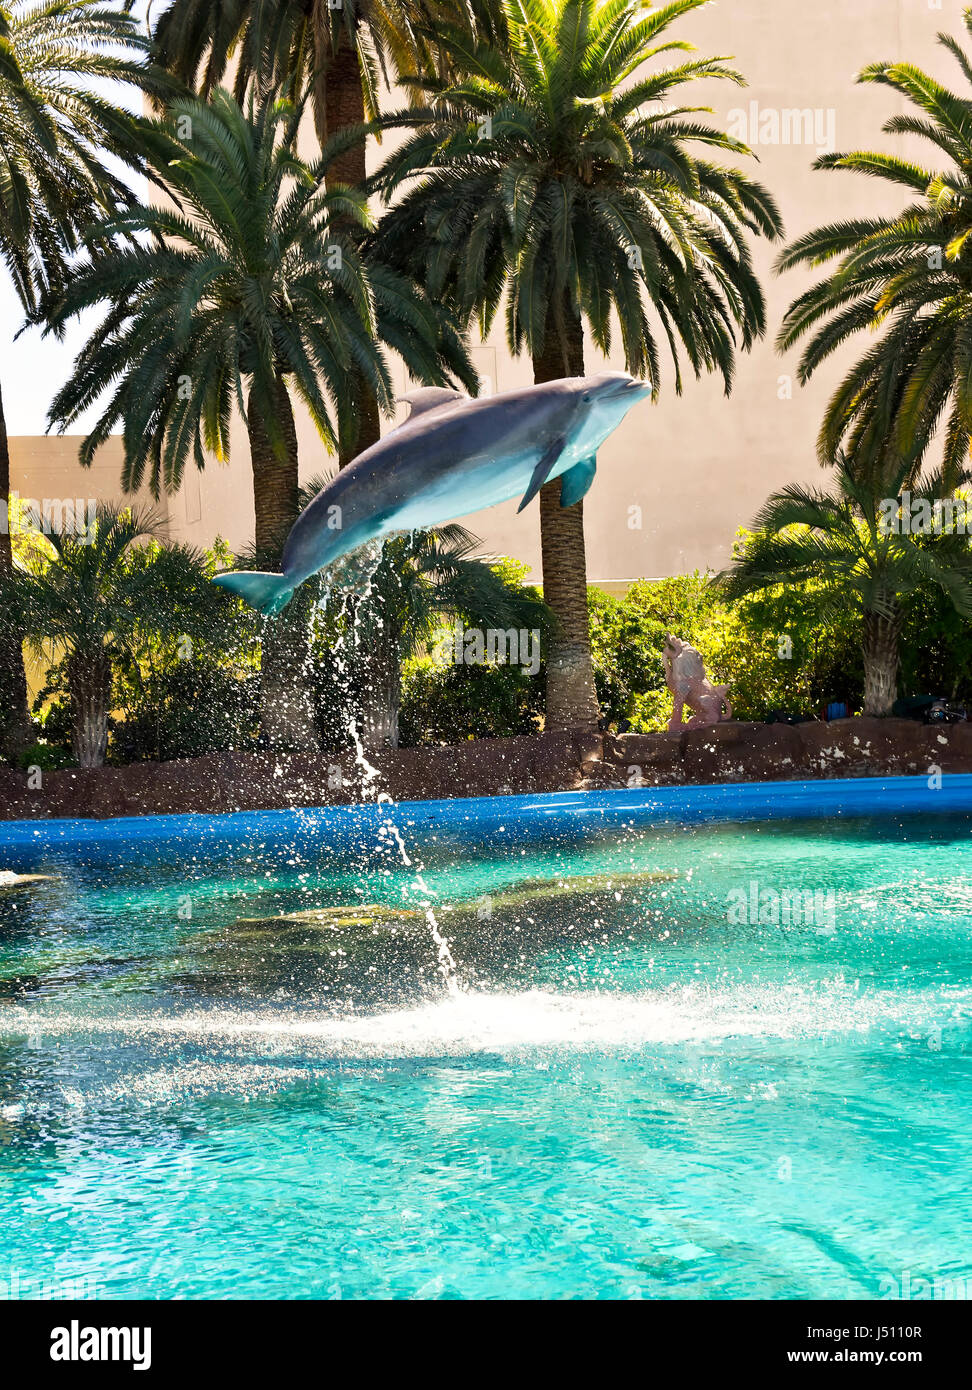 Osbourne the dolfin jumps out of the water on comand from his trainer at the Mirage, Secret Garden in Las Vegas, Nevada. Stock Photo